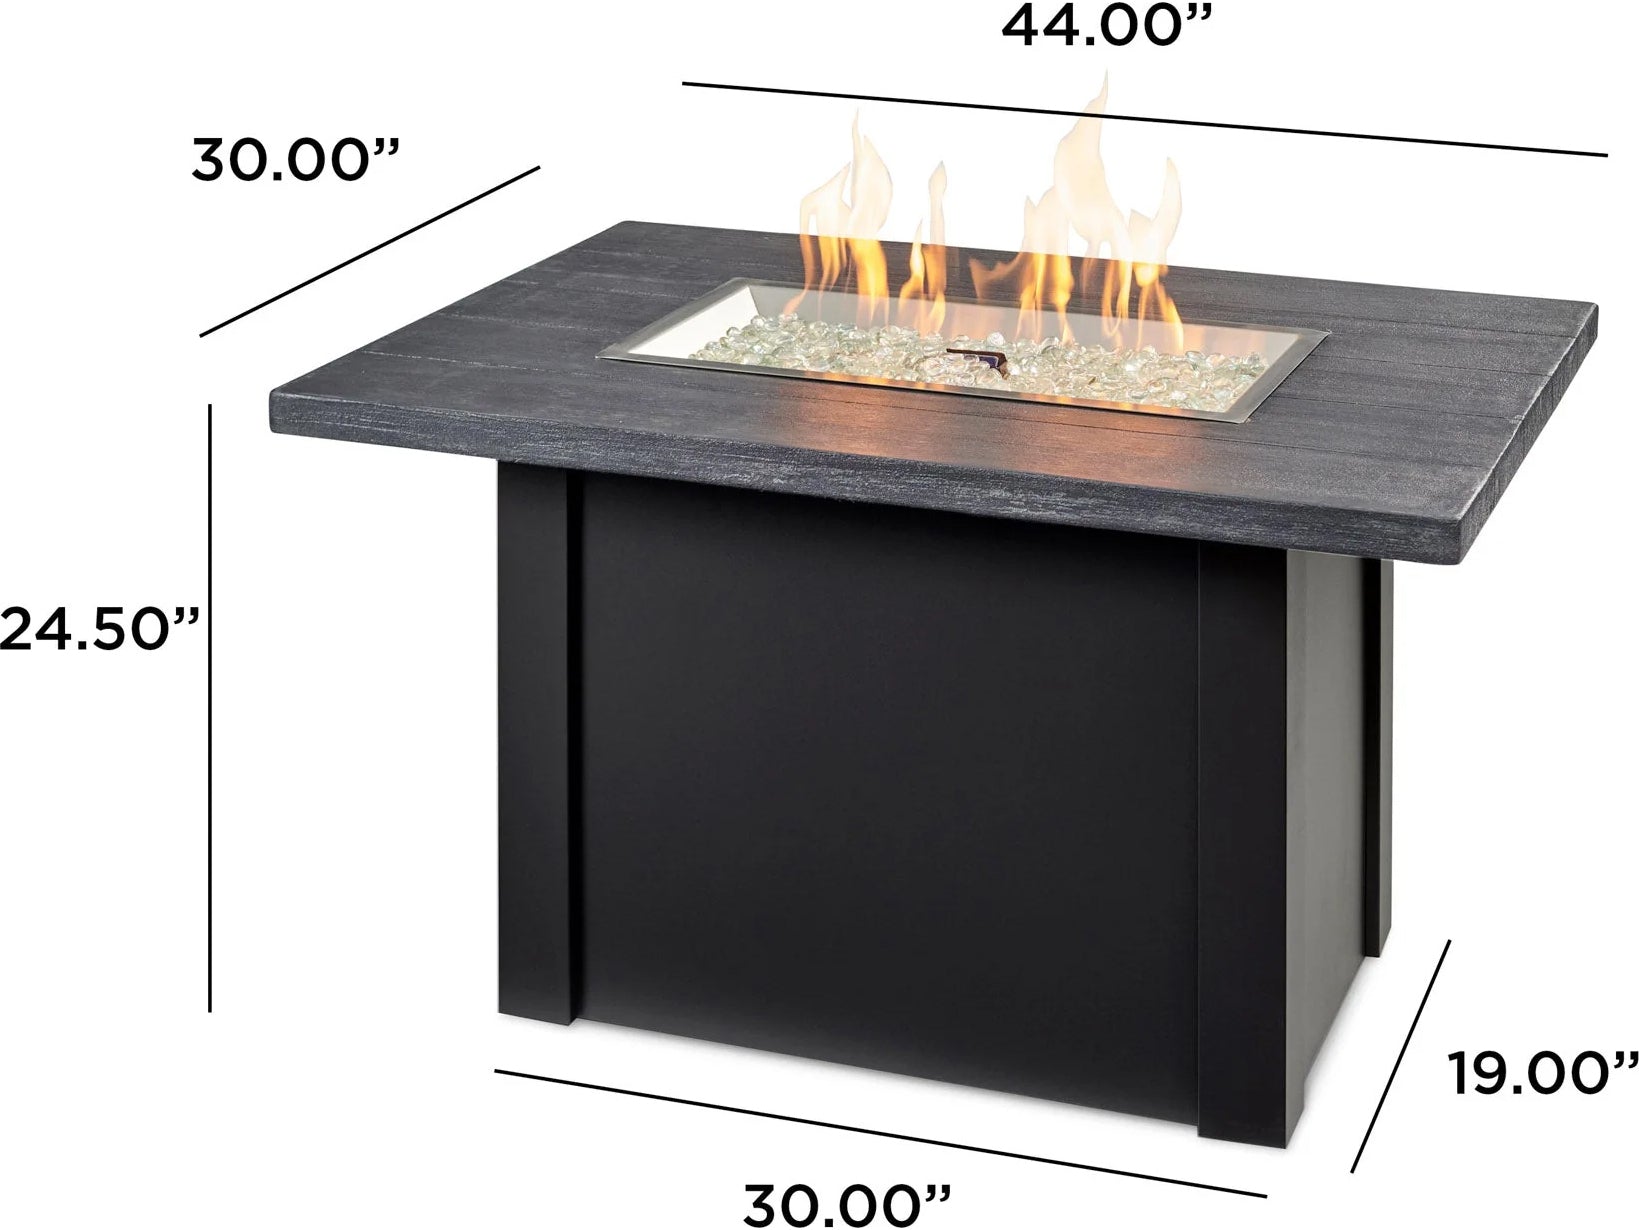 Outdoor Greatroom - 44’‘W x 30’'D - Havenwood Steel Luverne Black Rectangular Carbon Grey Everblend Top Gas Fire Pit Table